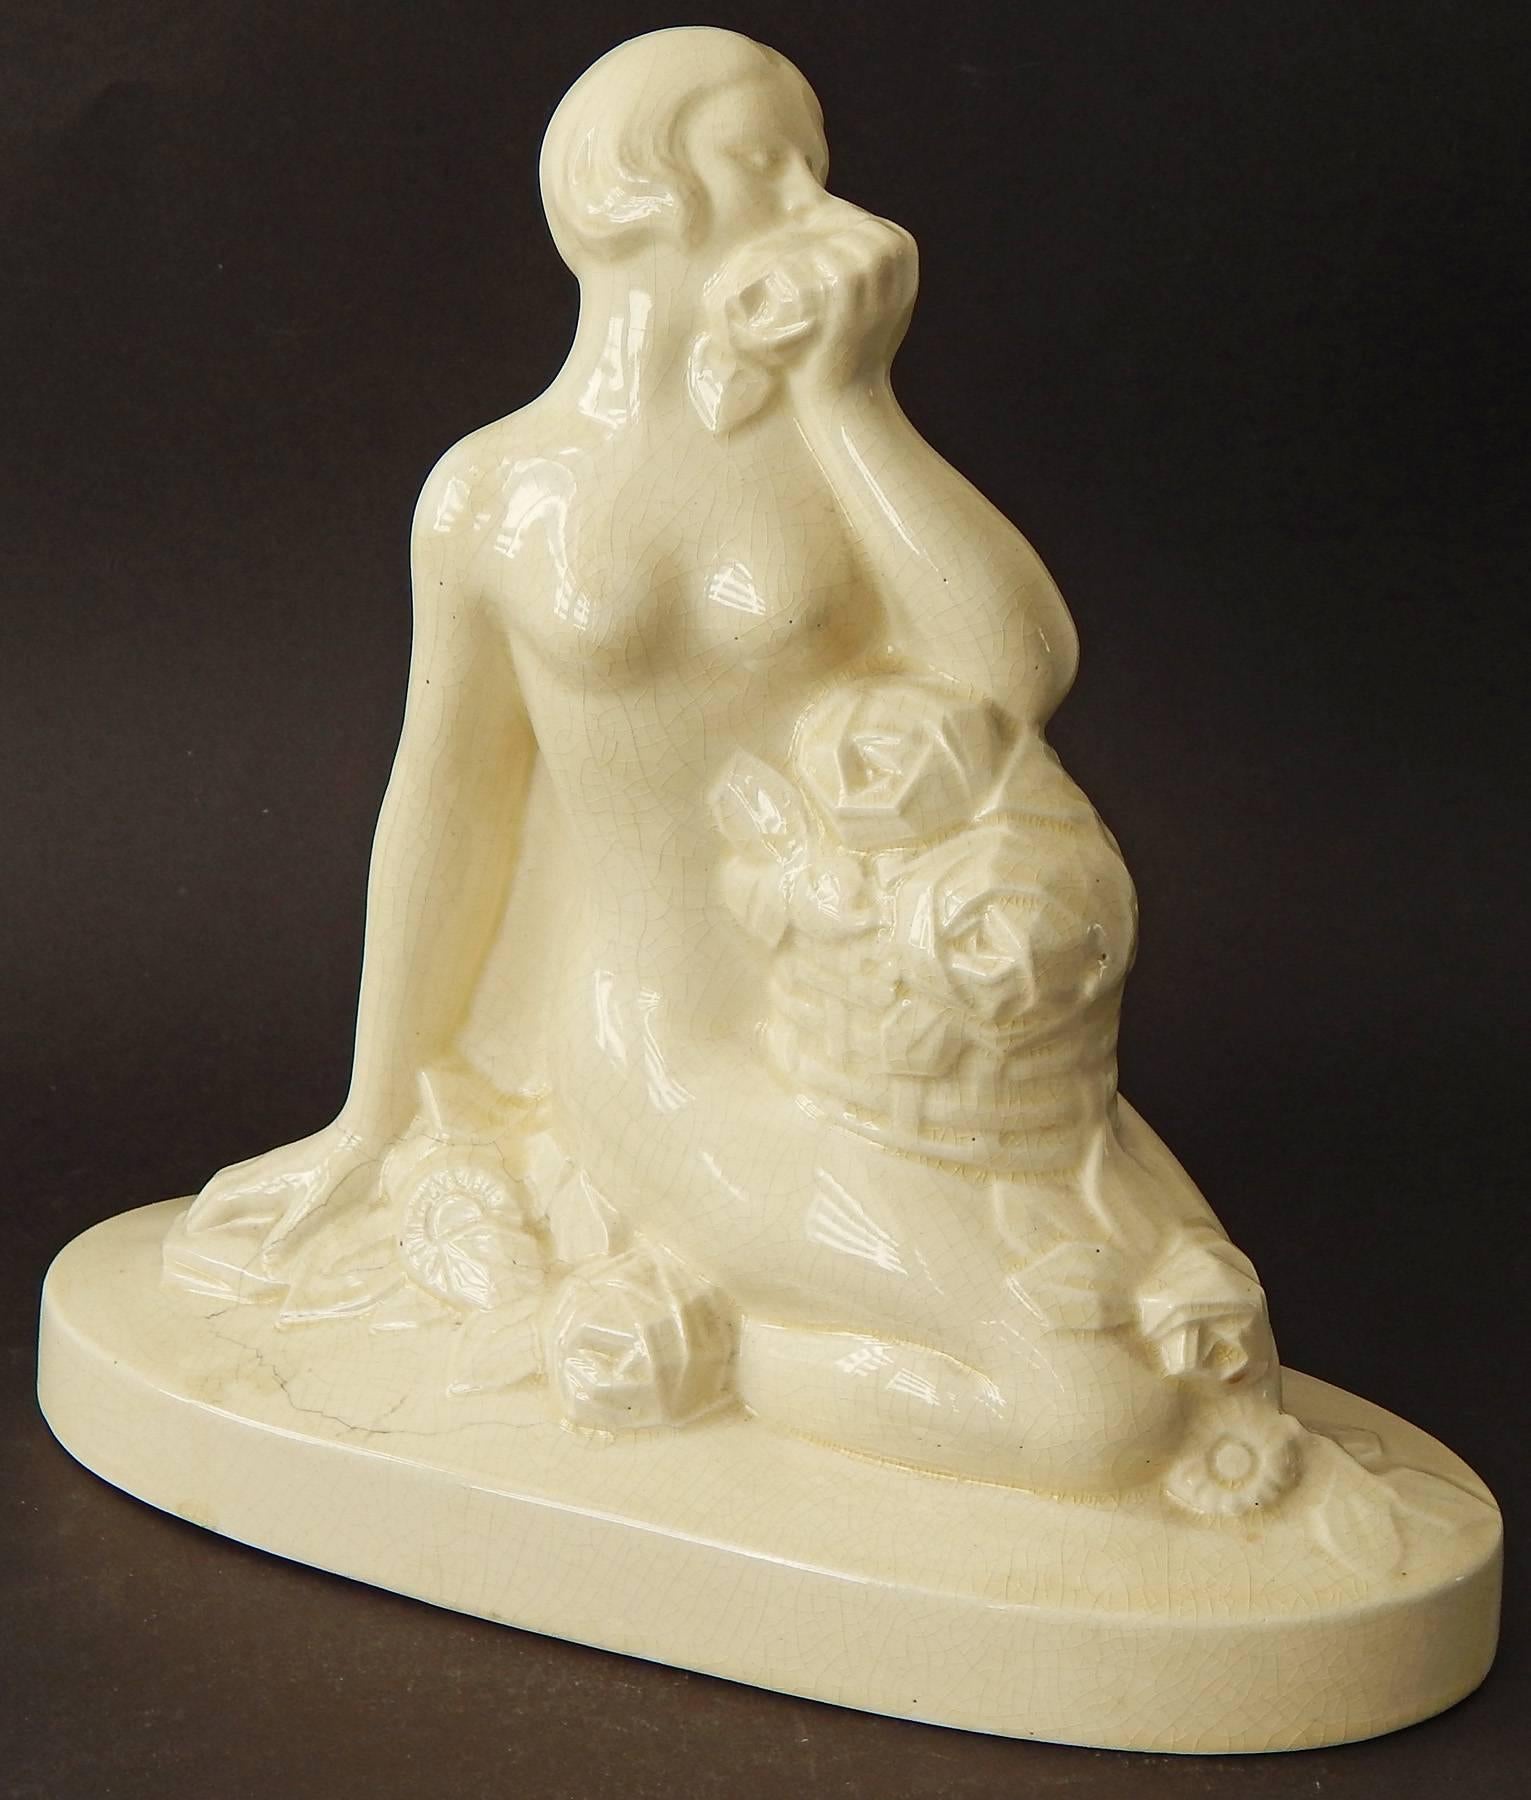 With a basket of roses in her lap, more roses at her feet, and another at her nose, this lovely sculpture of a female nude with a very modern hair style is a classic example of Art Deco design. The sculpture was produced by the famed Onnaing